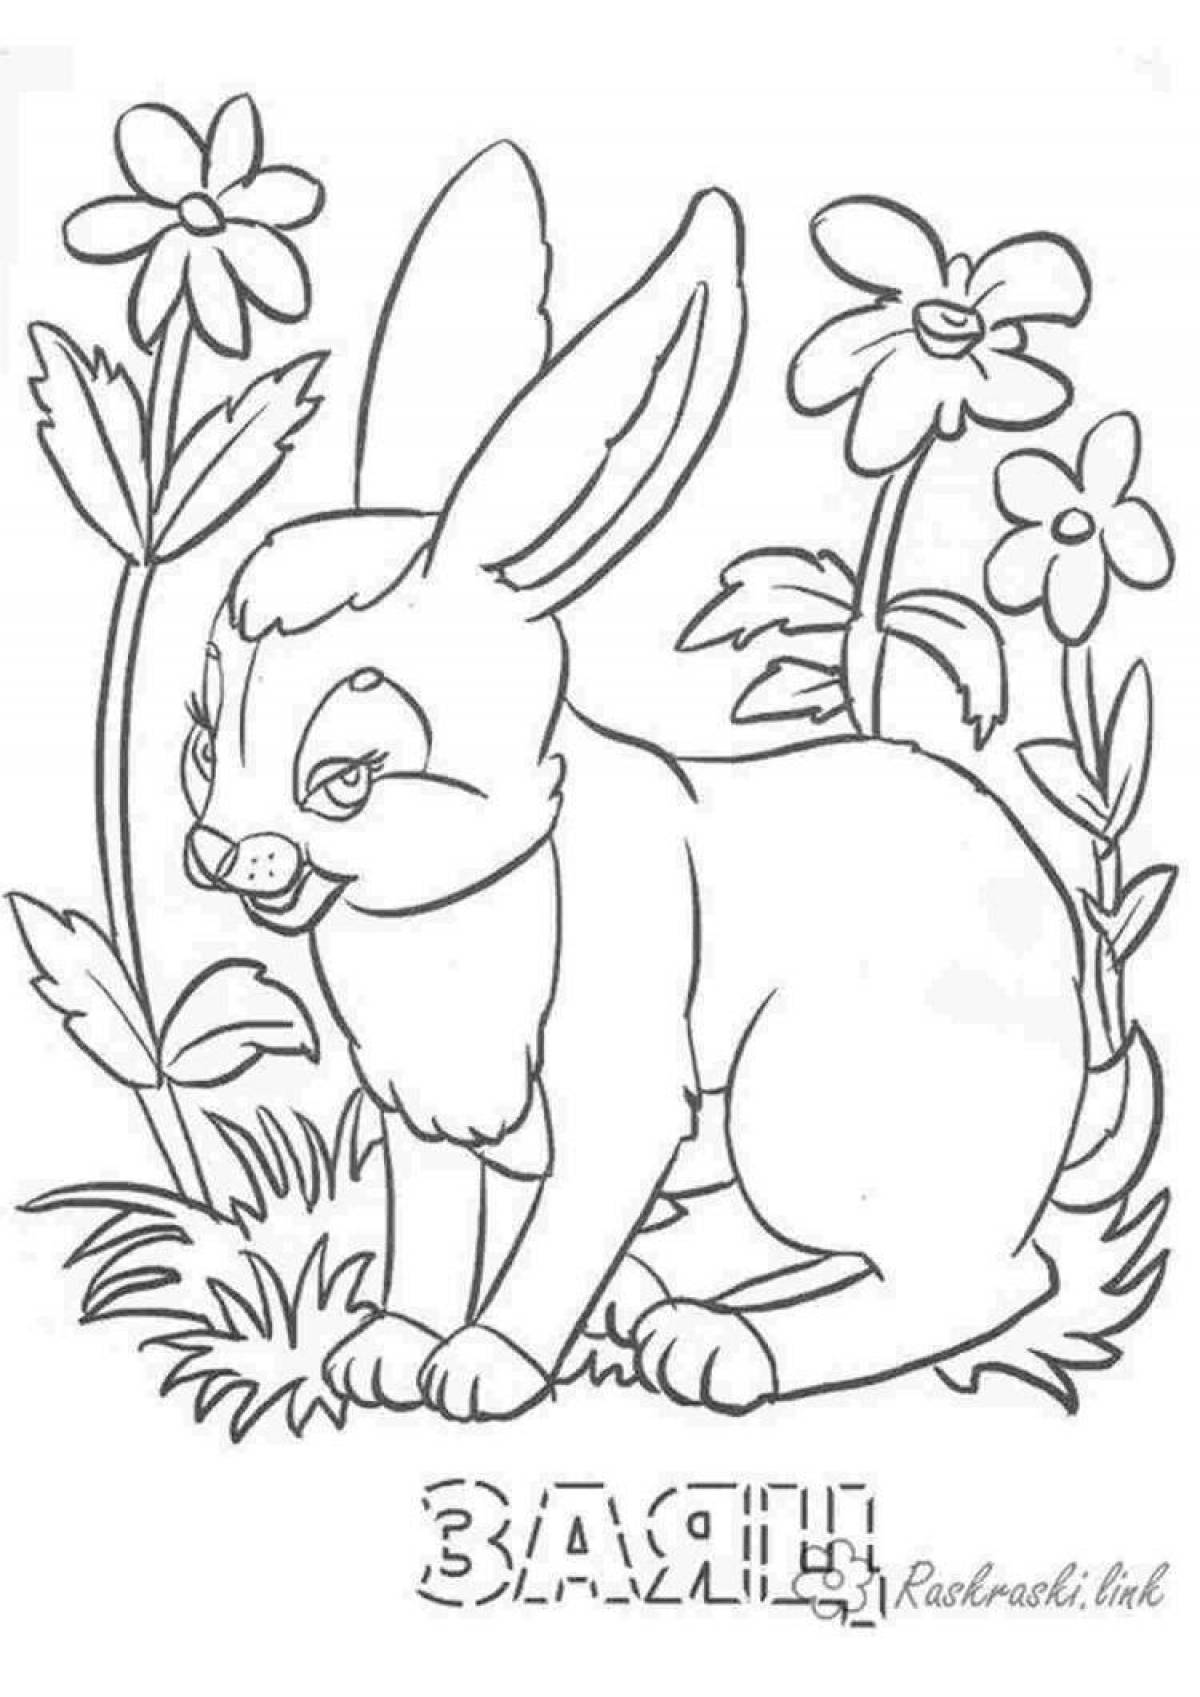 Wonderful hare and squirrel coloring book